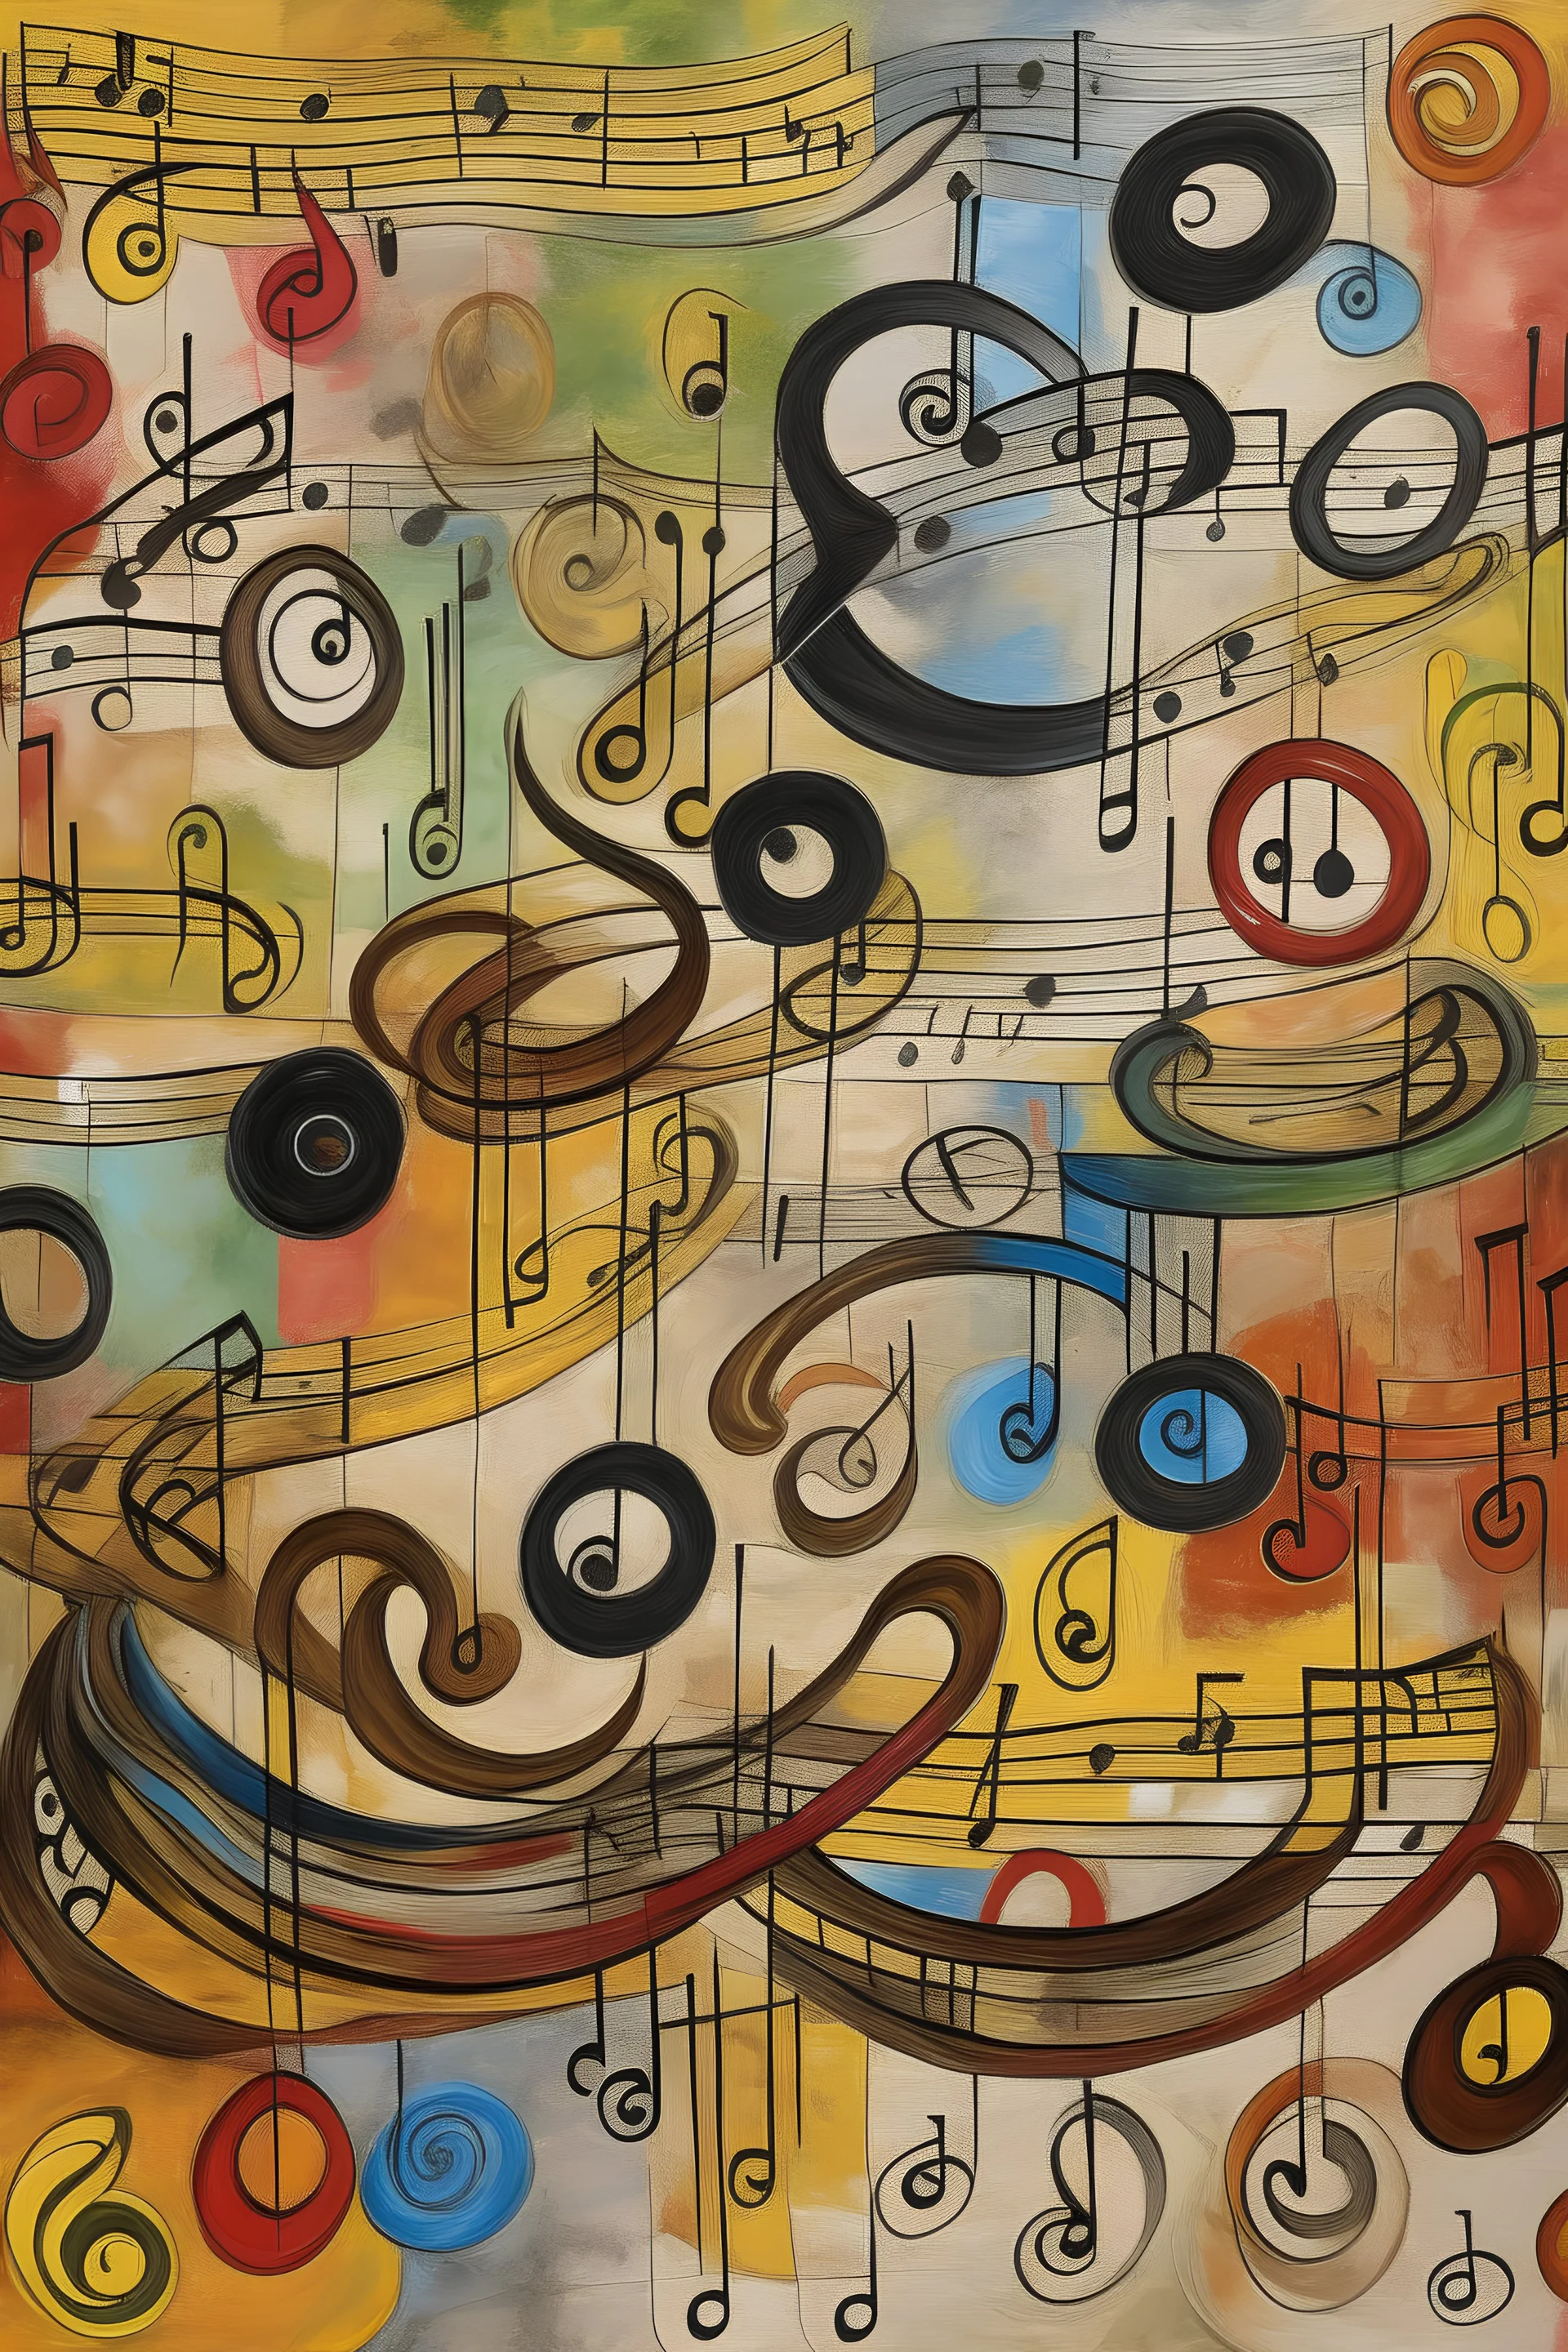 A painting of music symbols